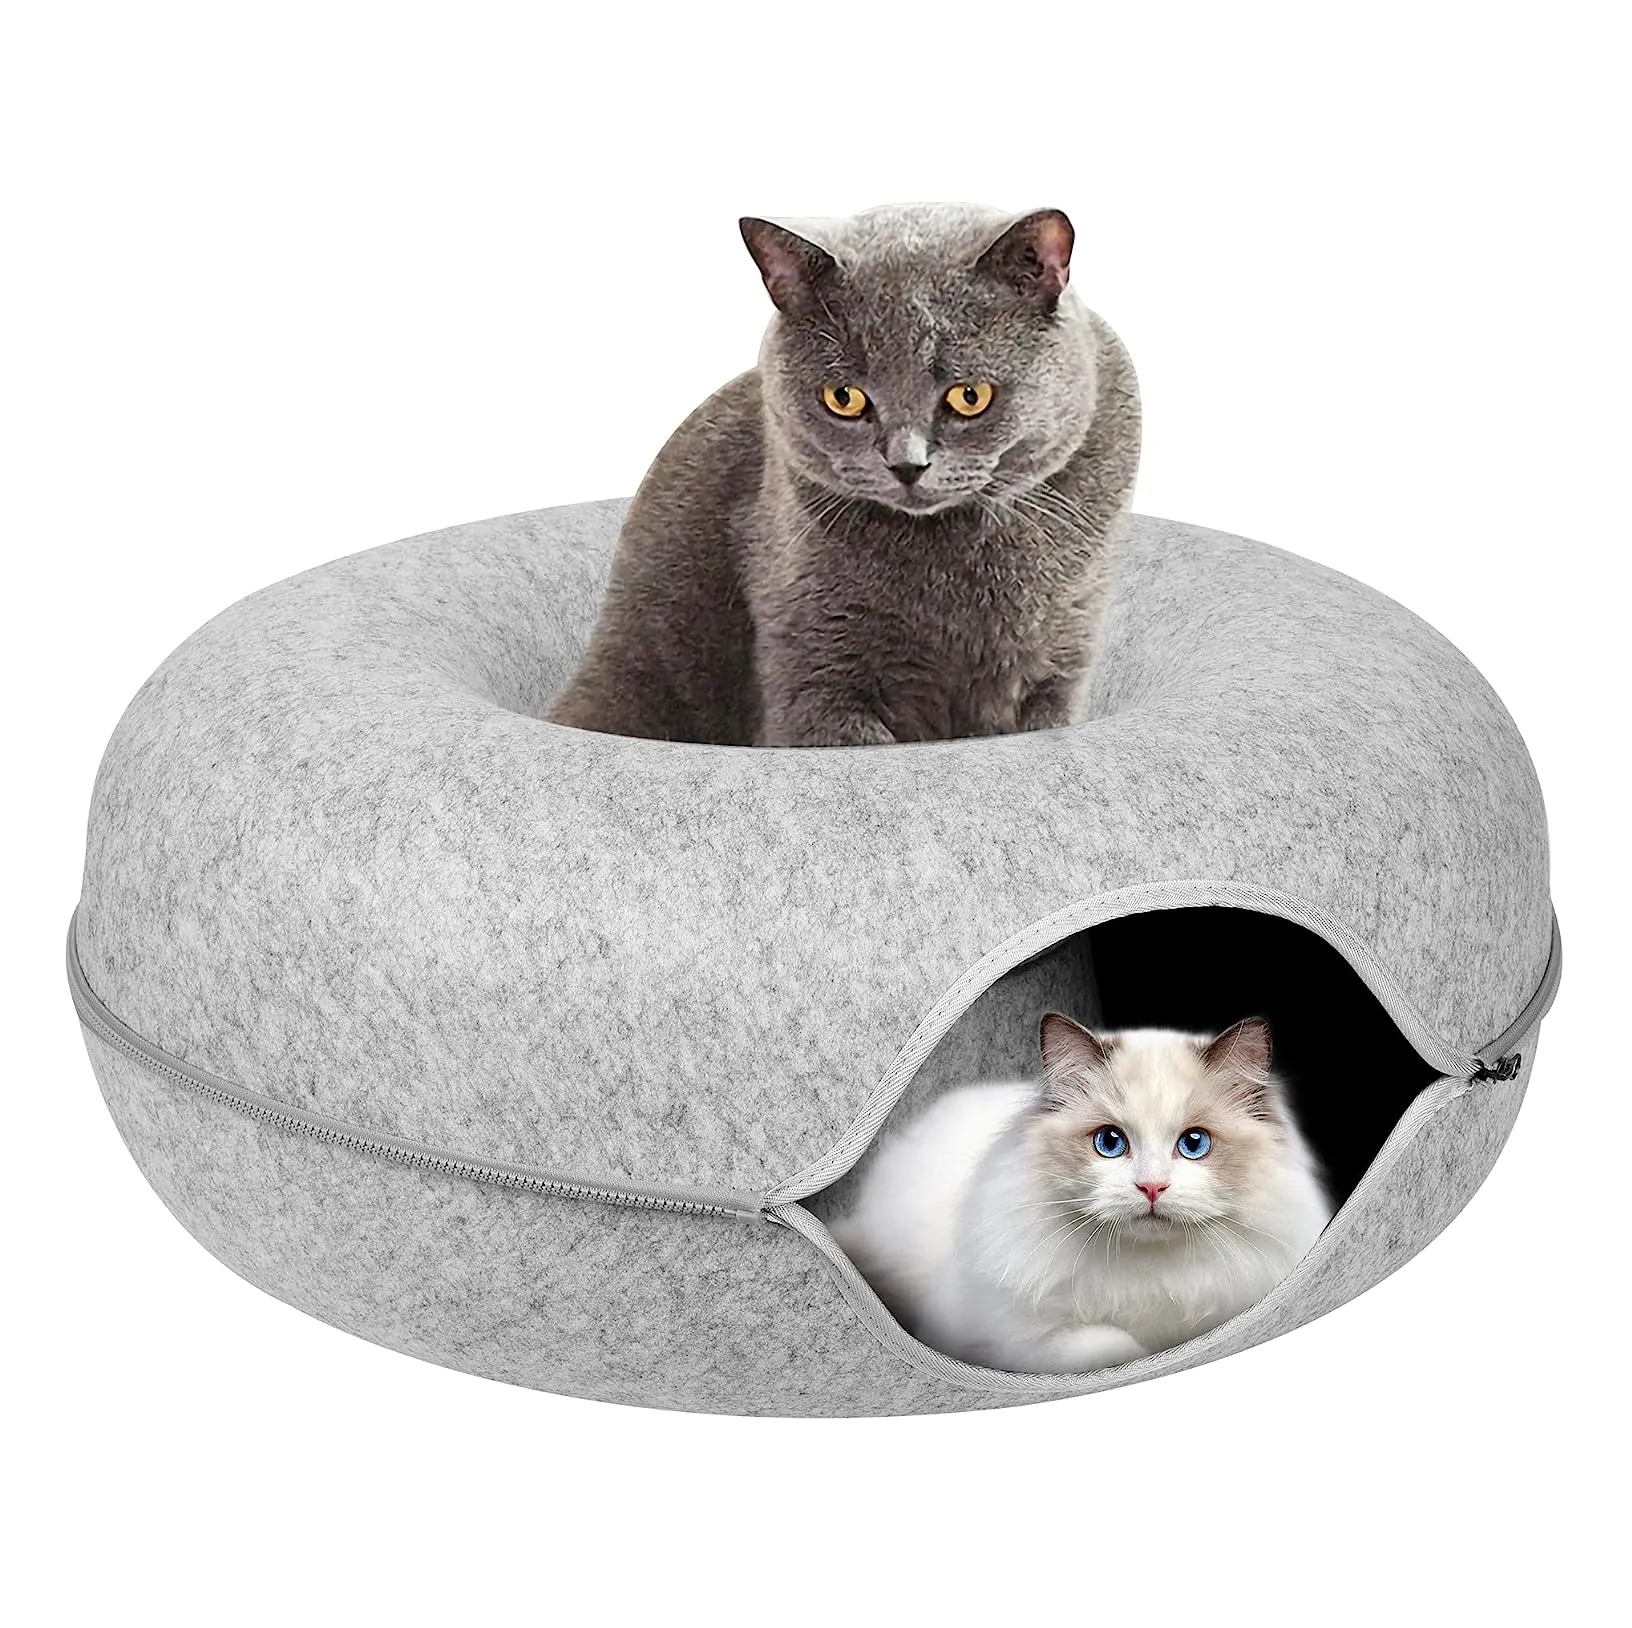 New Design Novelty Dice Shape Short plush Cat Cave Bed Interesting House For Cats Small Dogs Pet Bed With Hanging Dice Toy